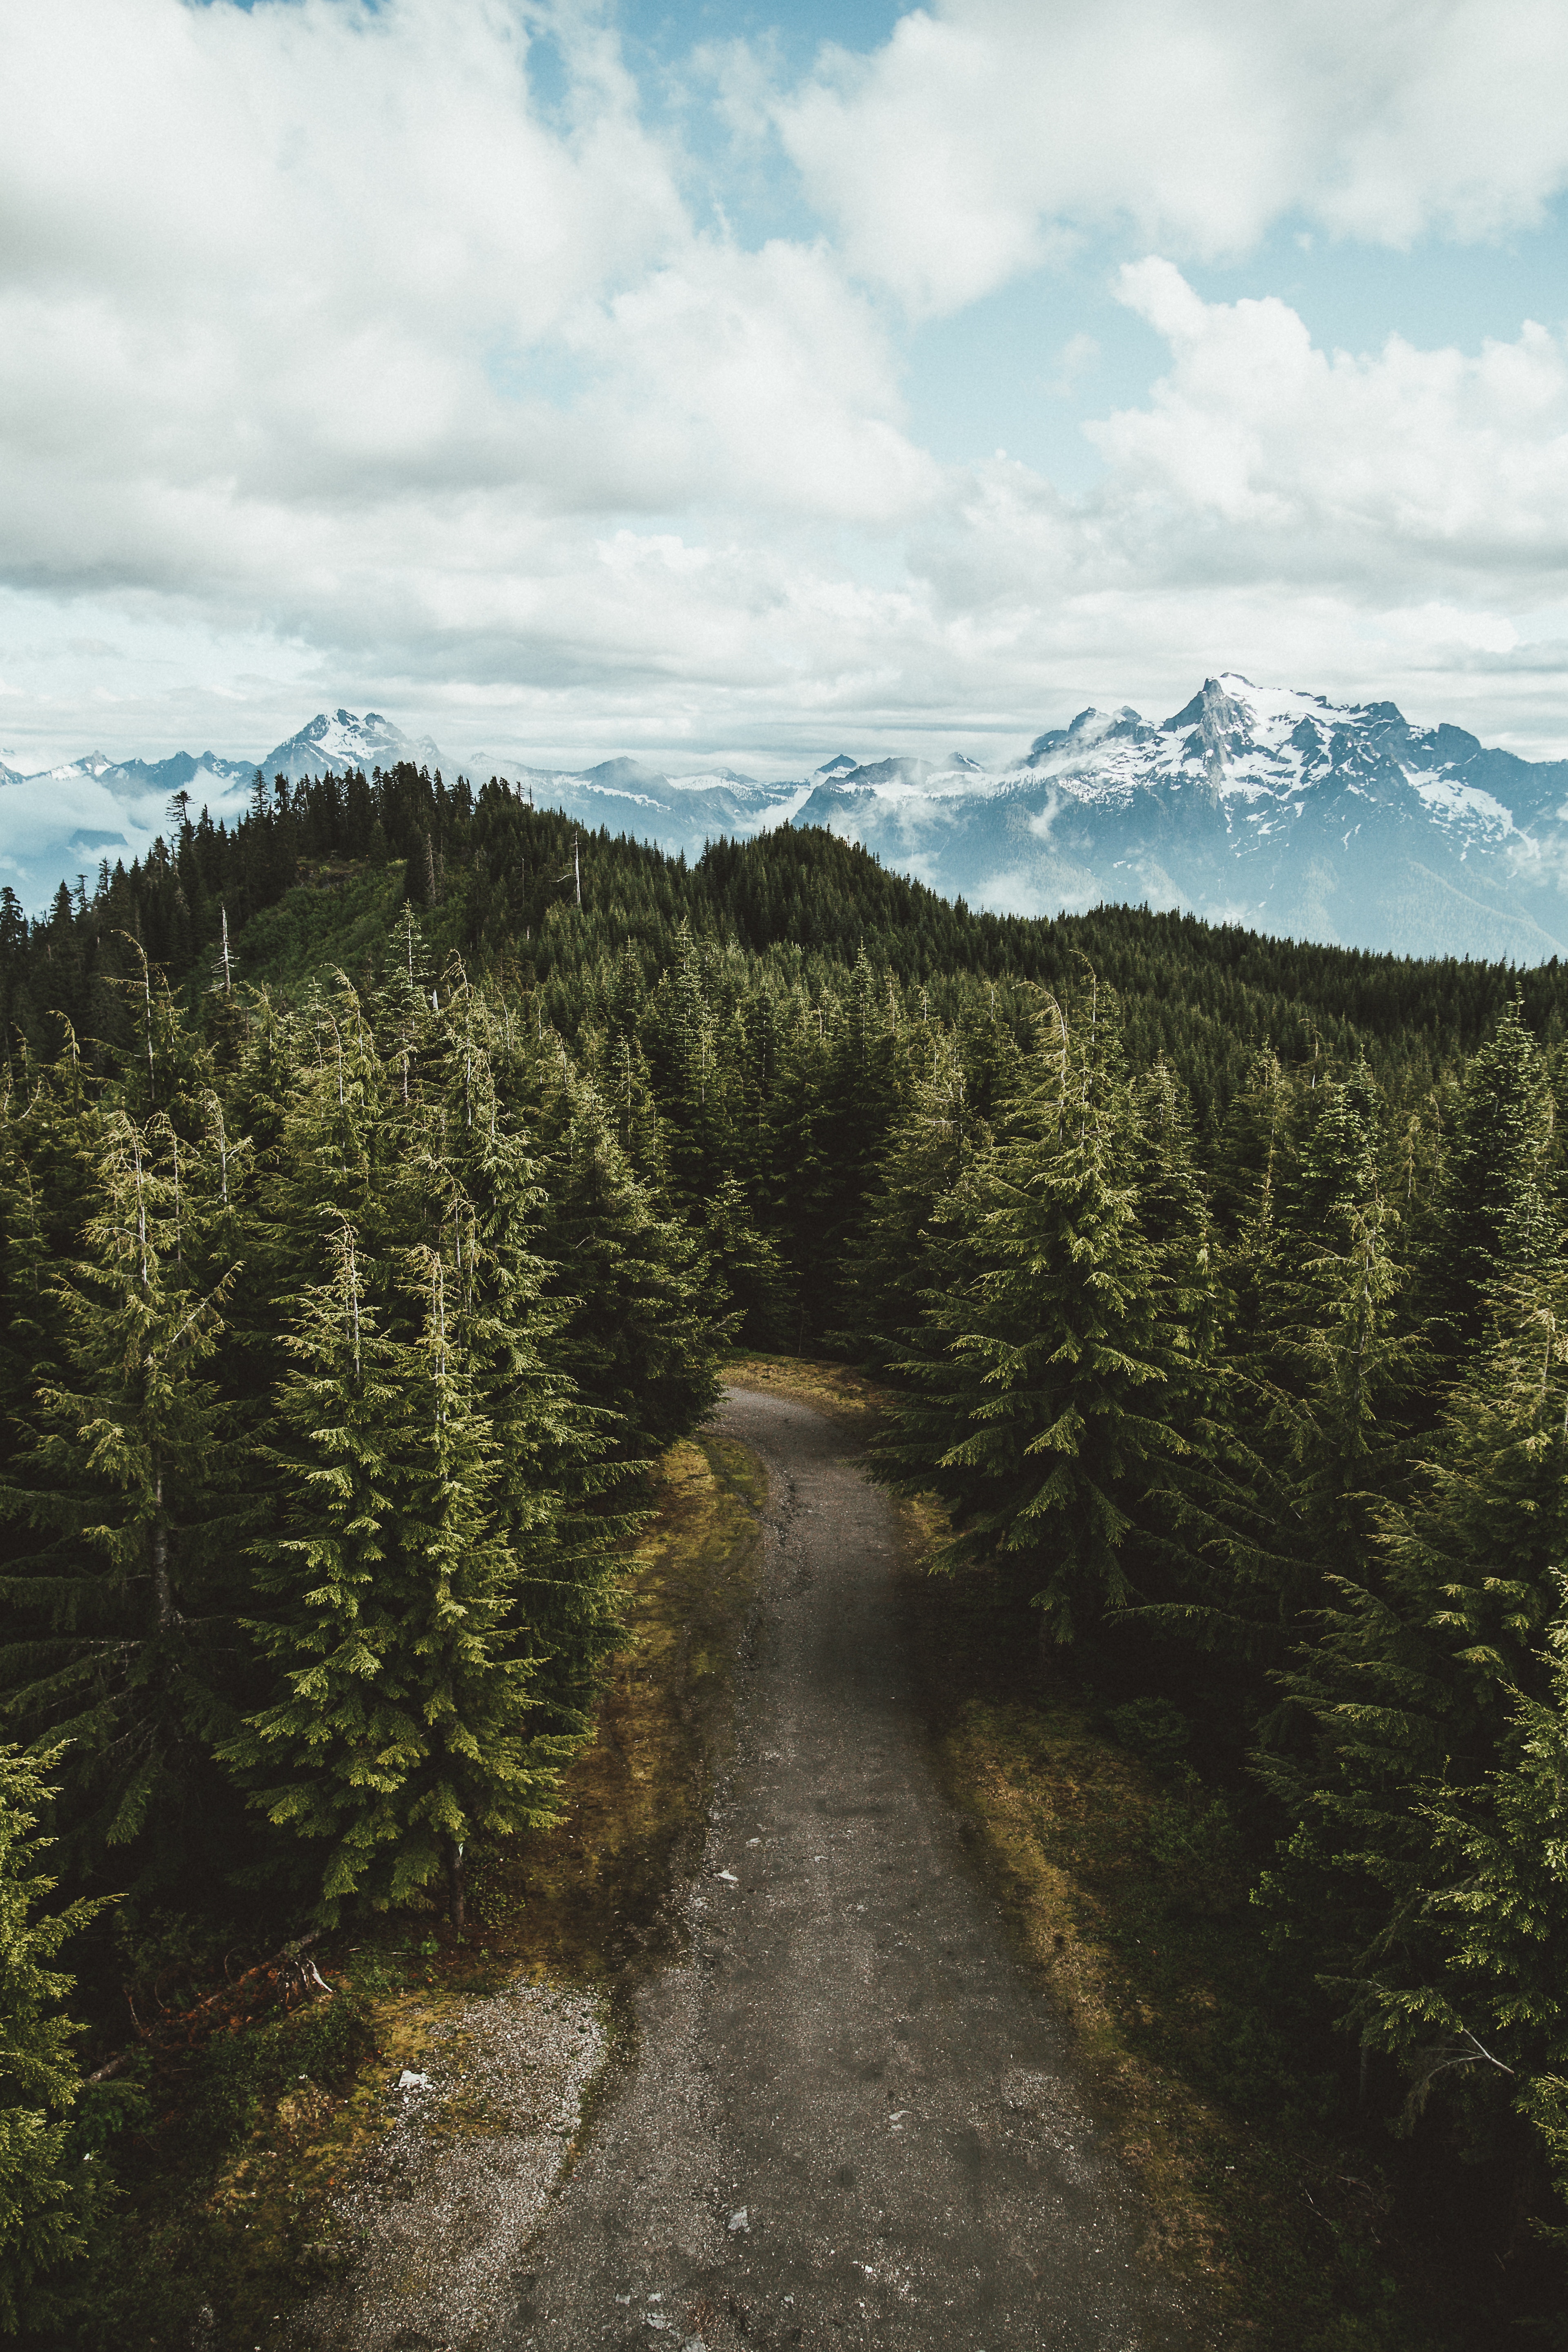 usa, united states, landscape, nature, trees, sky, mountains, view from above, road, darrington UHD